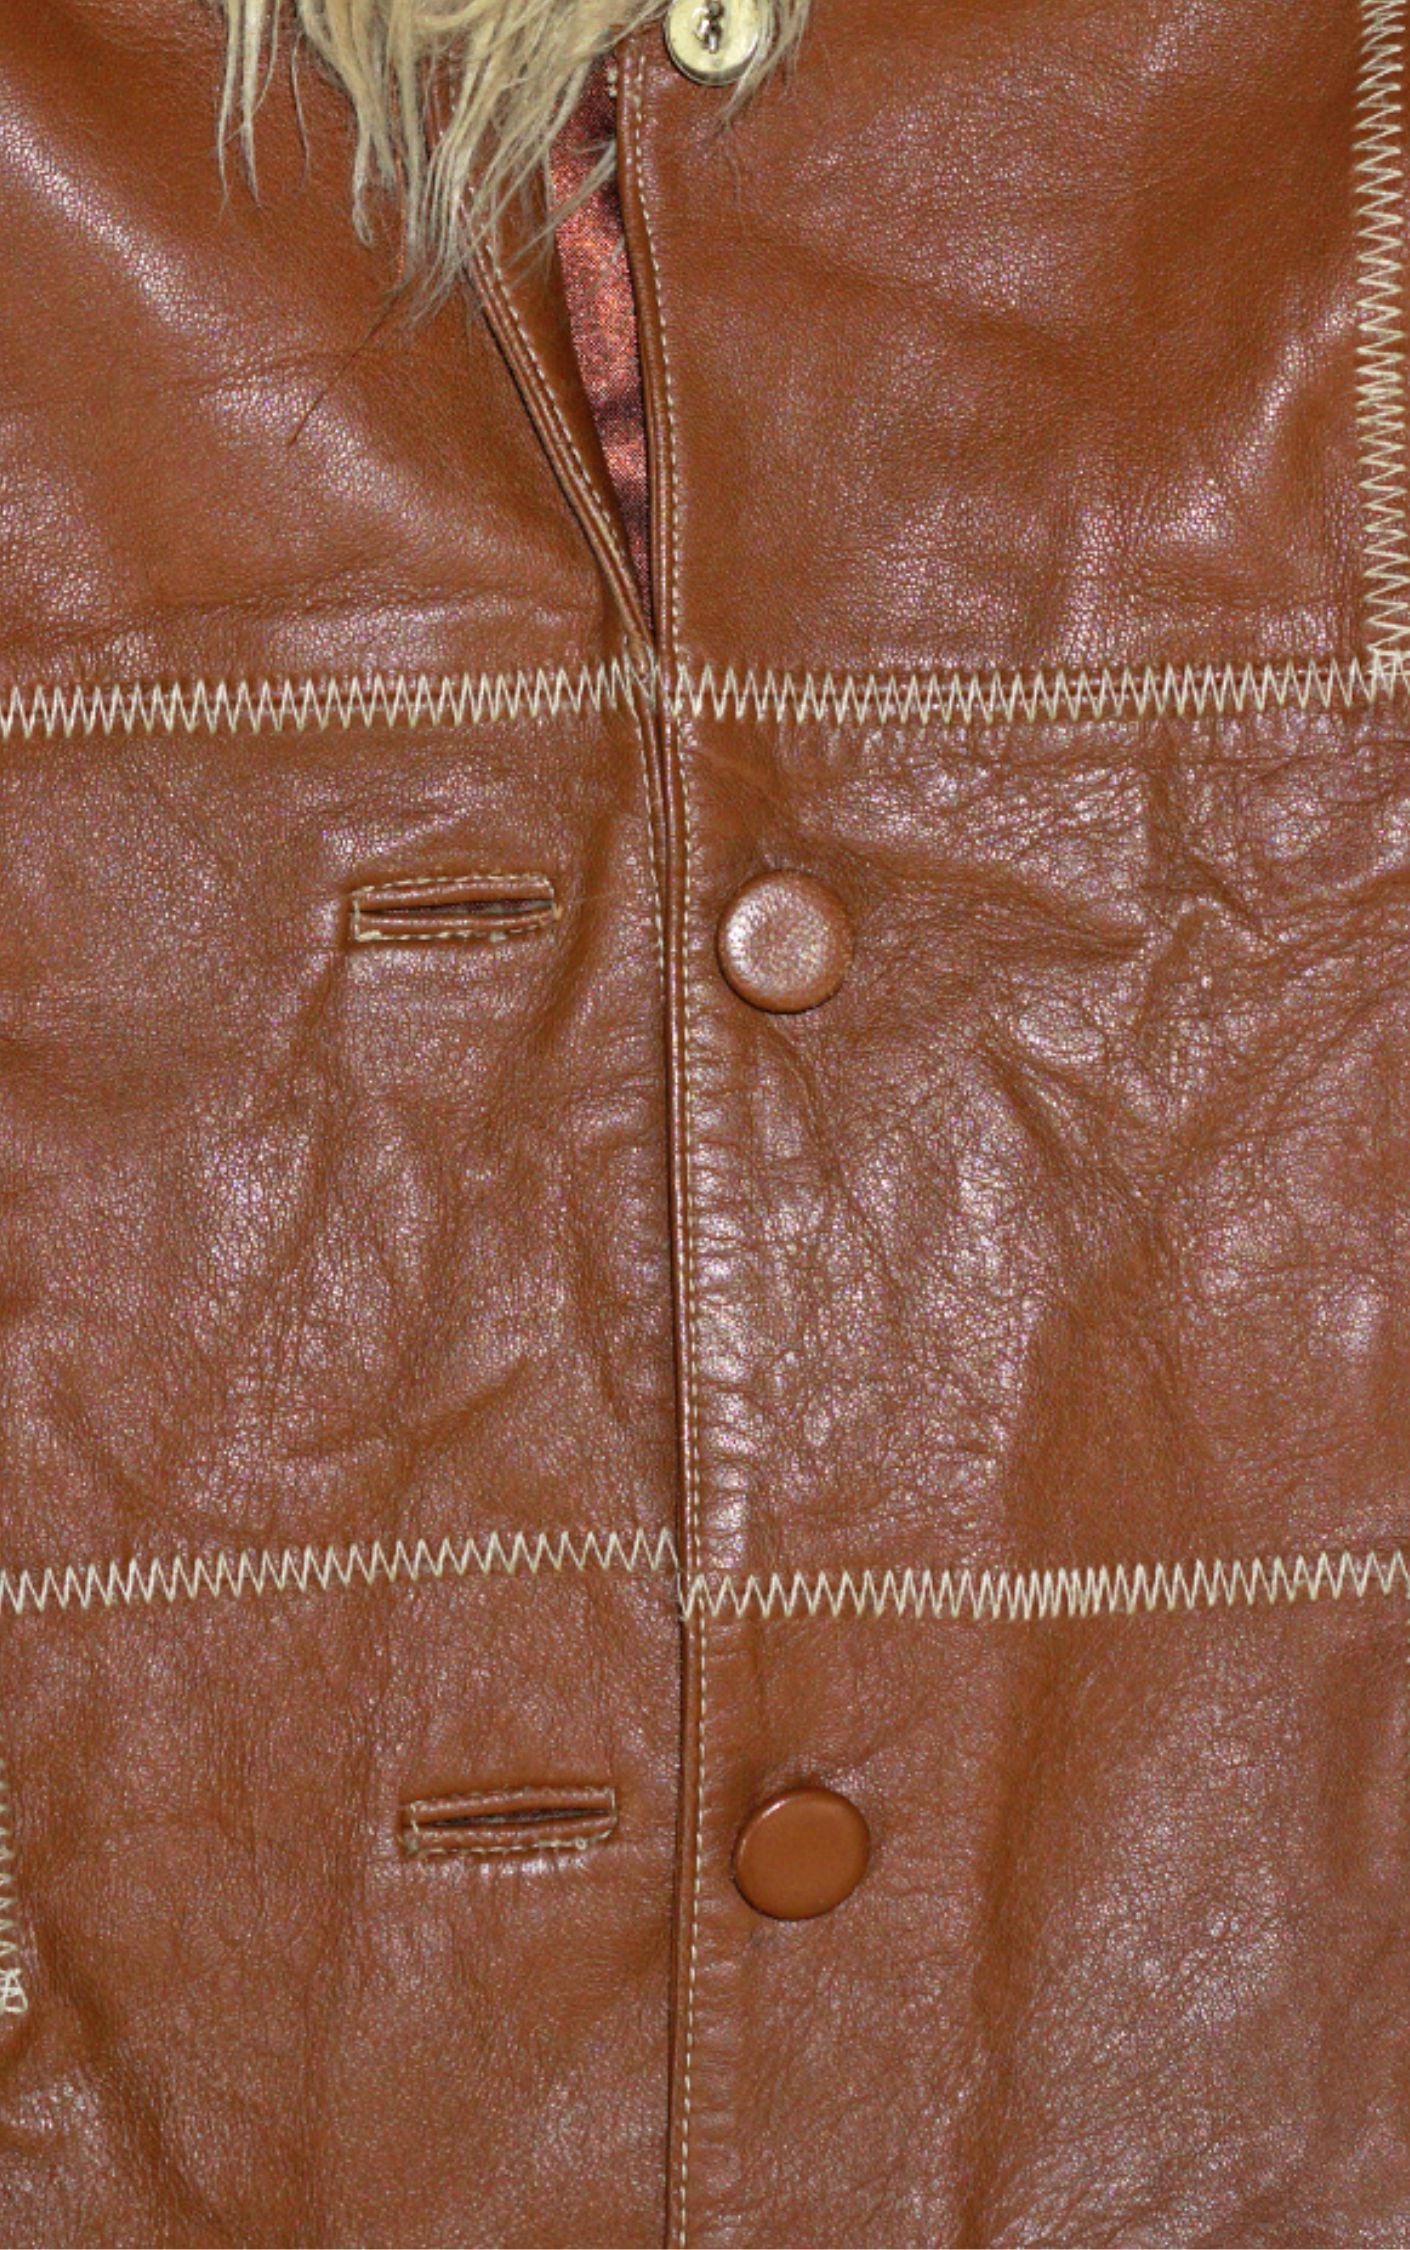 WILSON LEATHER Patchwork Brown Penny Lane Coat resellum